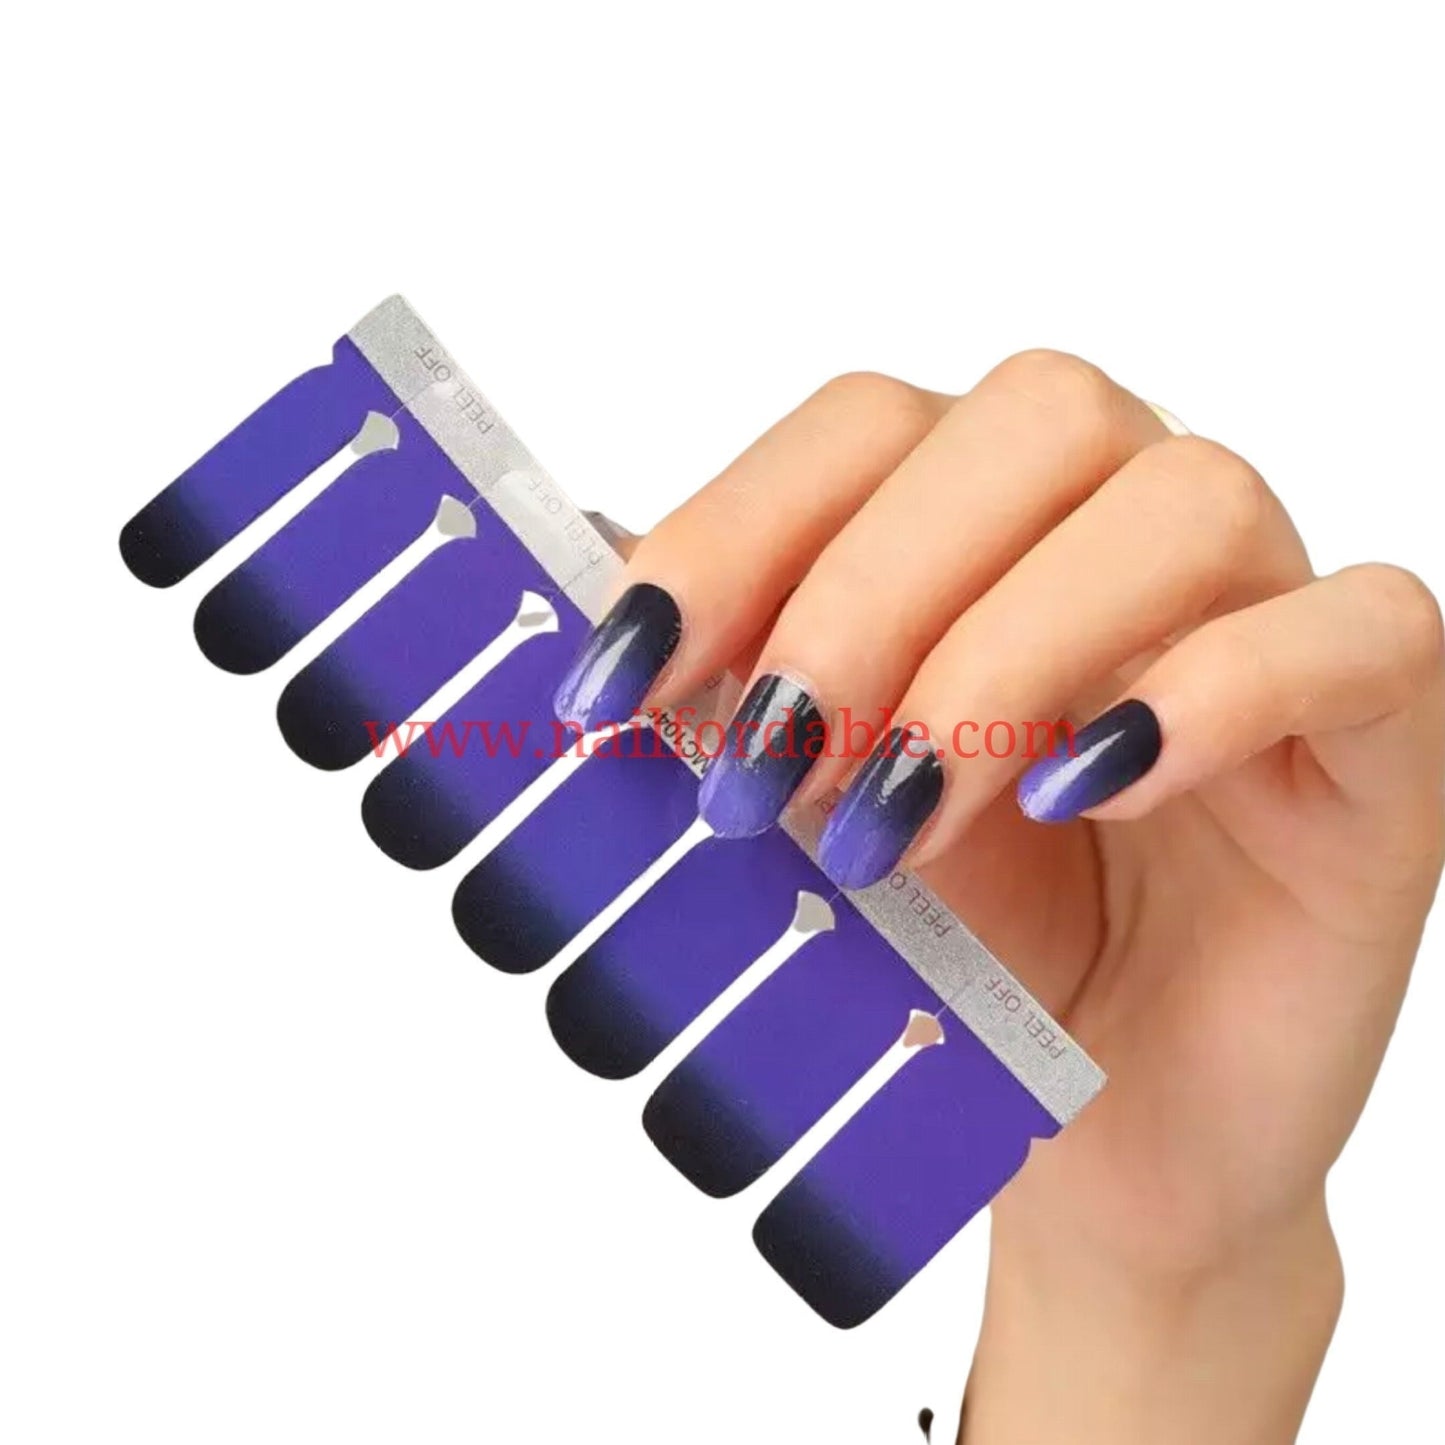 Purple and black Nail Wraps | Semi Cured Gel Wraps | Gel Nail Wraps |Nail Polish | Nail Stickers